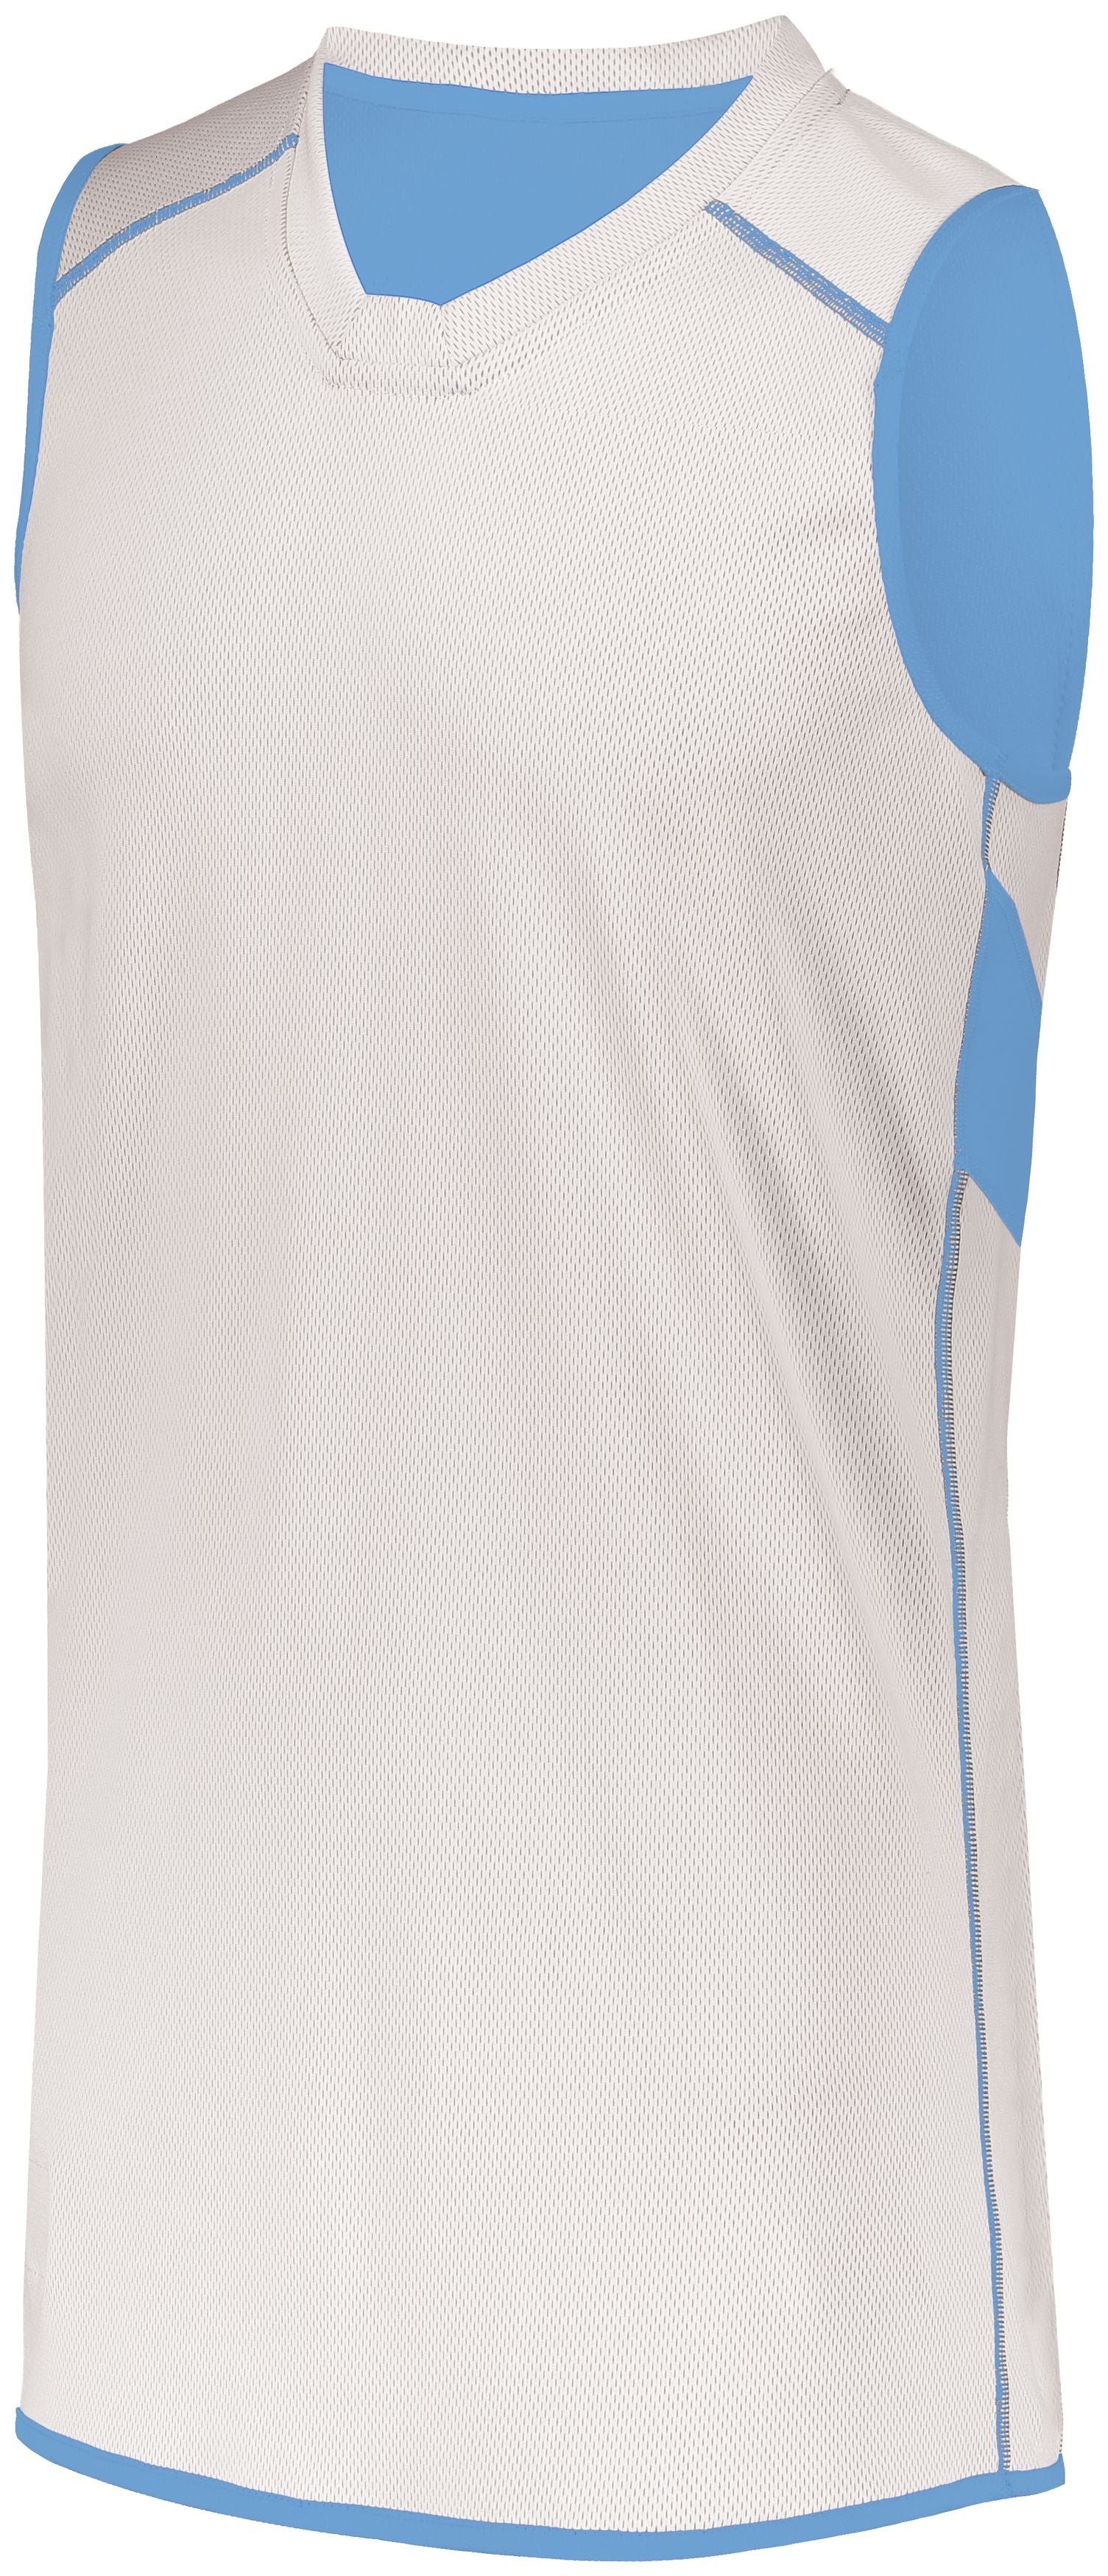 Holloway Dual-Side Single Ply Basketball Jersey in University Blue/White  -Part of the Adult, Adult-Jersey, Basketball, Holloway, Shirts, All-Sports, All-Sports-1 product lines at KanaleyCreations.com